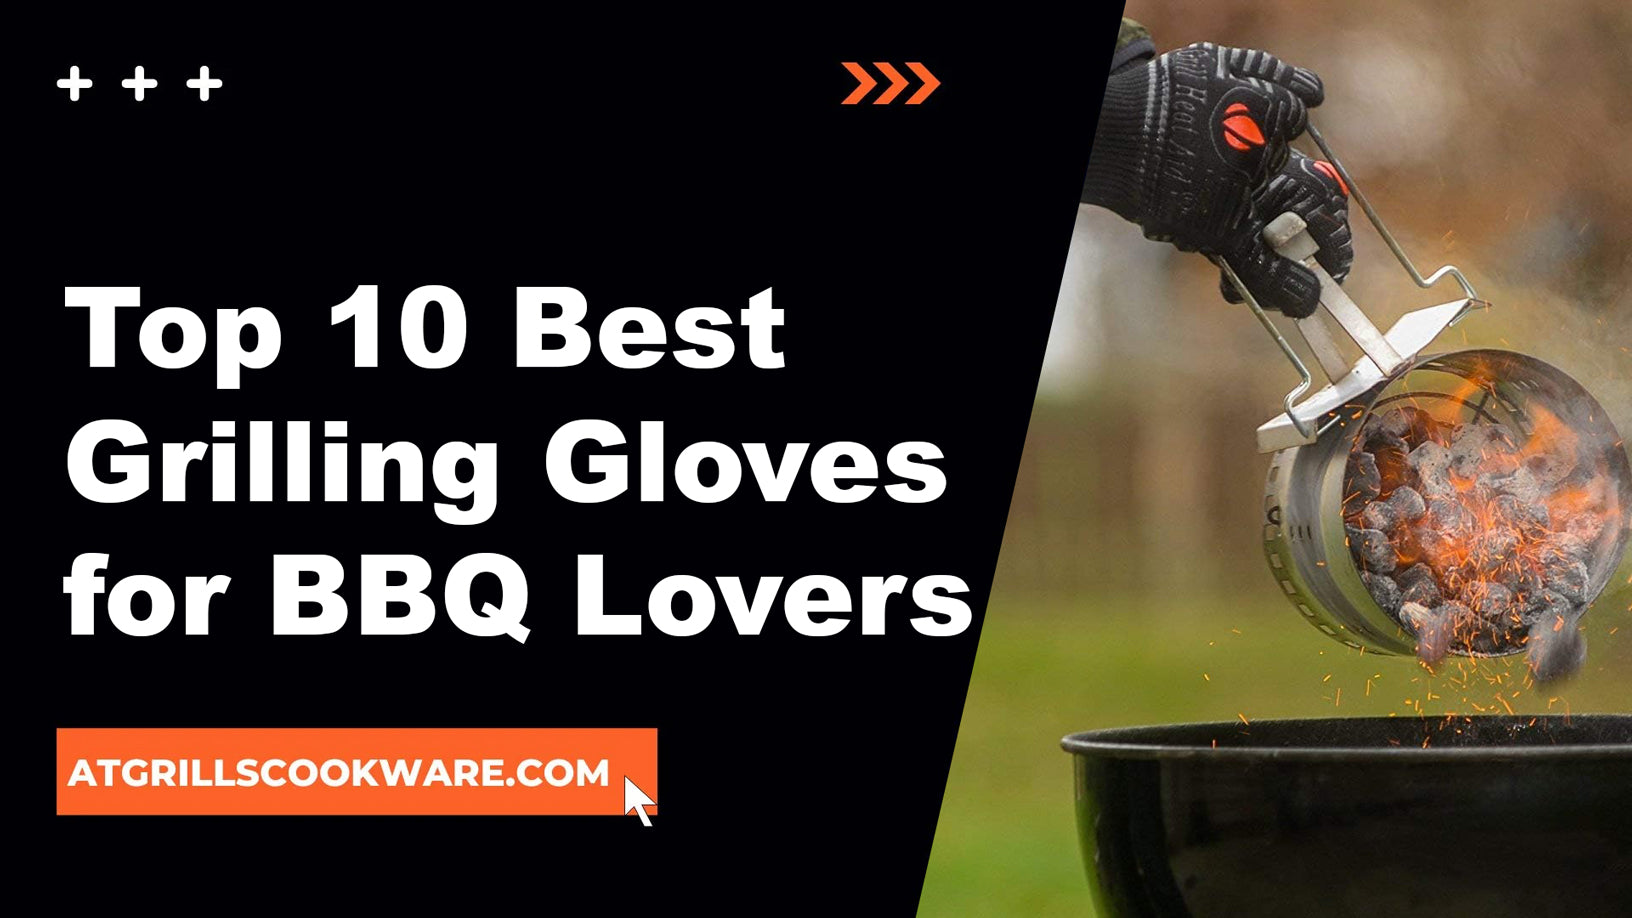 The Ultimate Guide to the Top 10 Best Grilling Gloves for BBQ Lovers